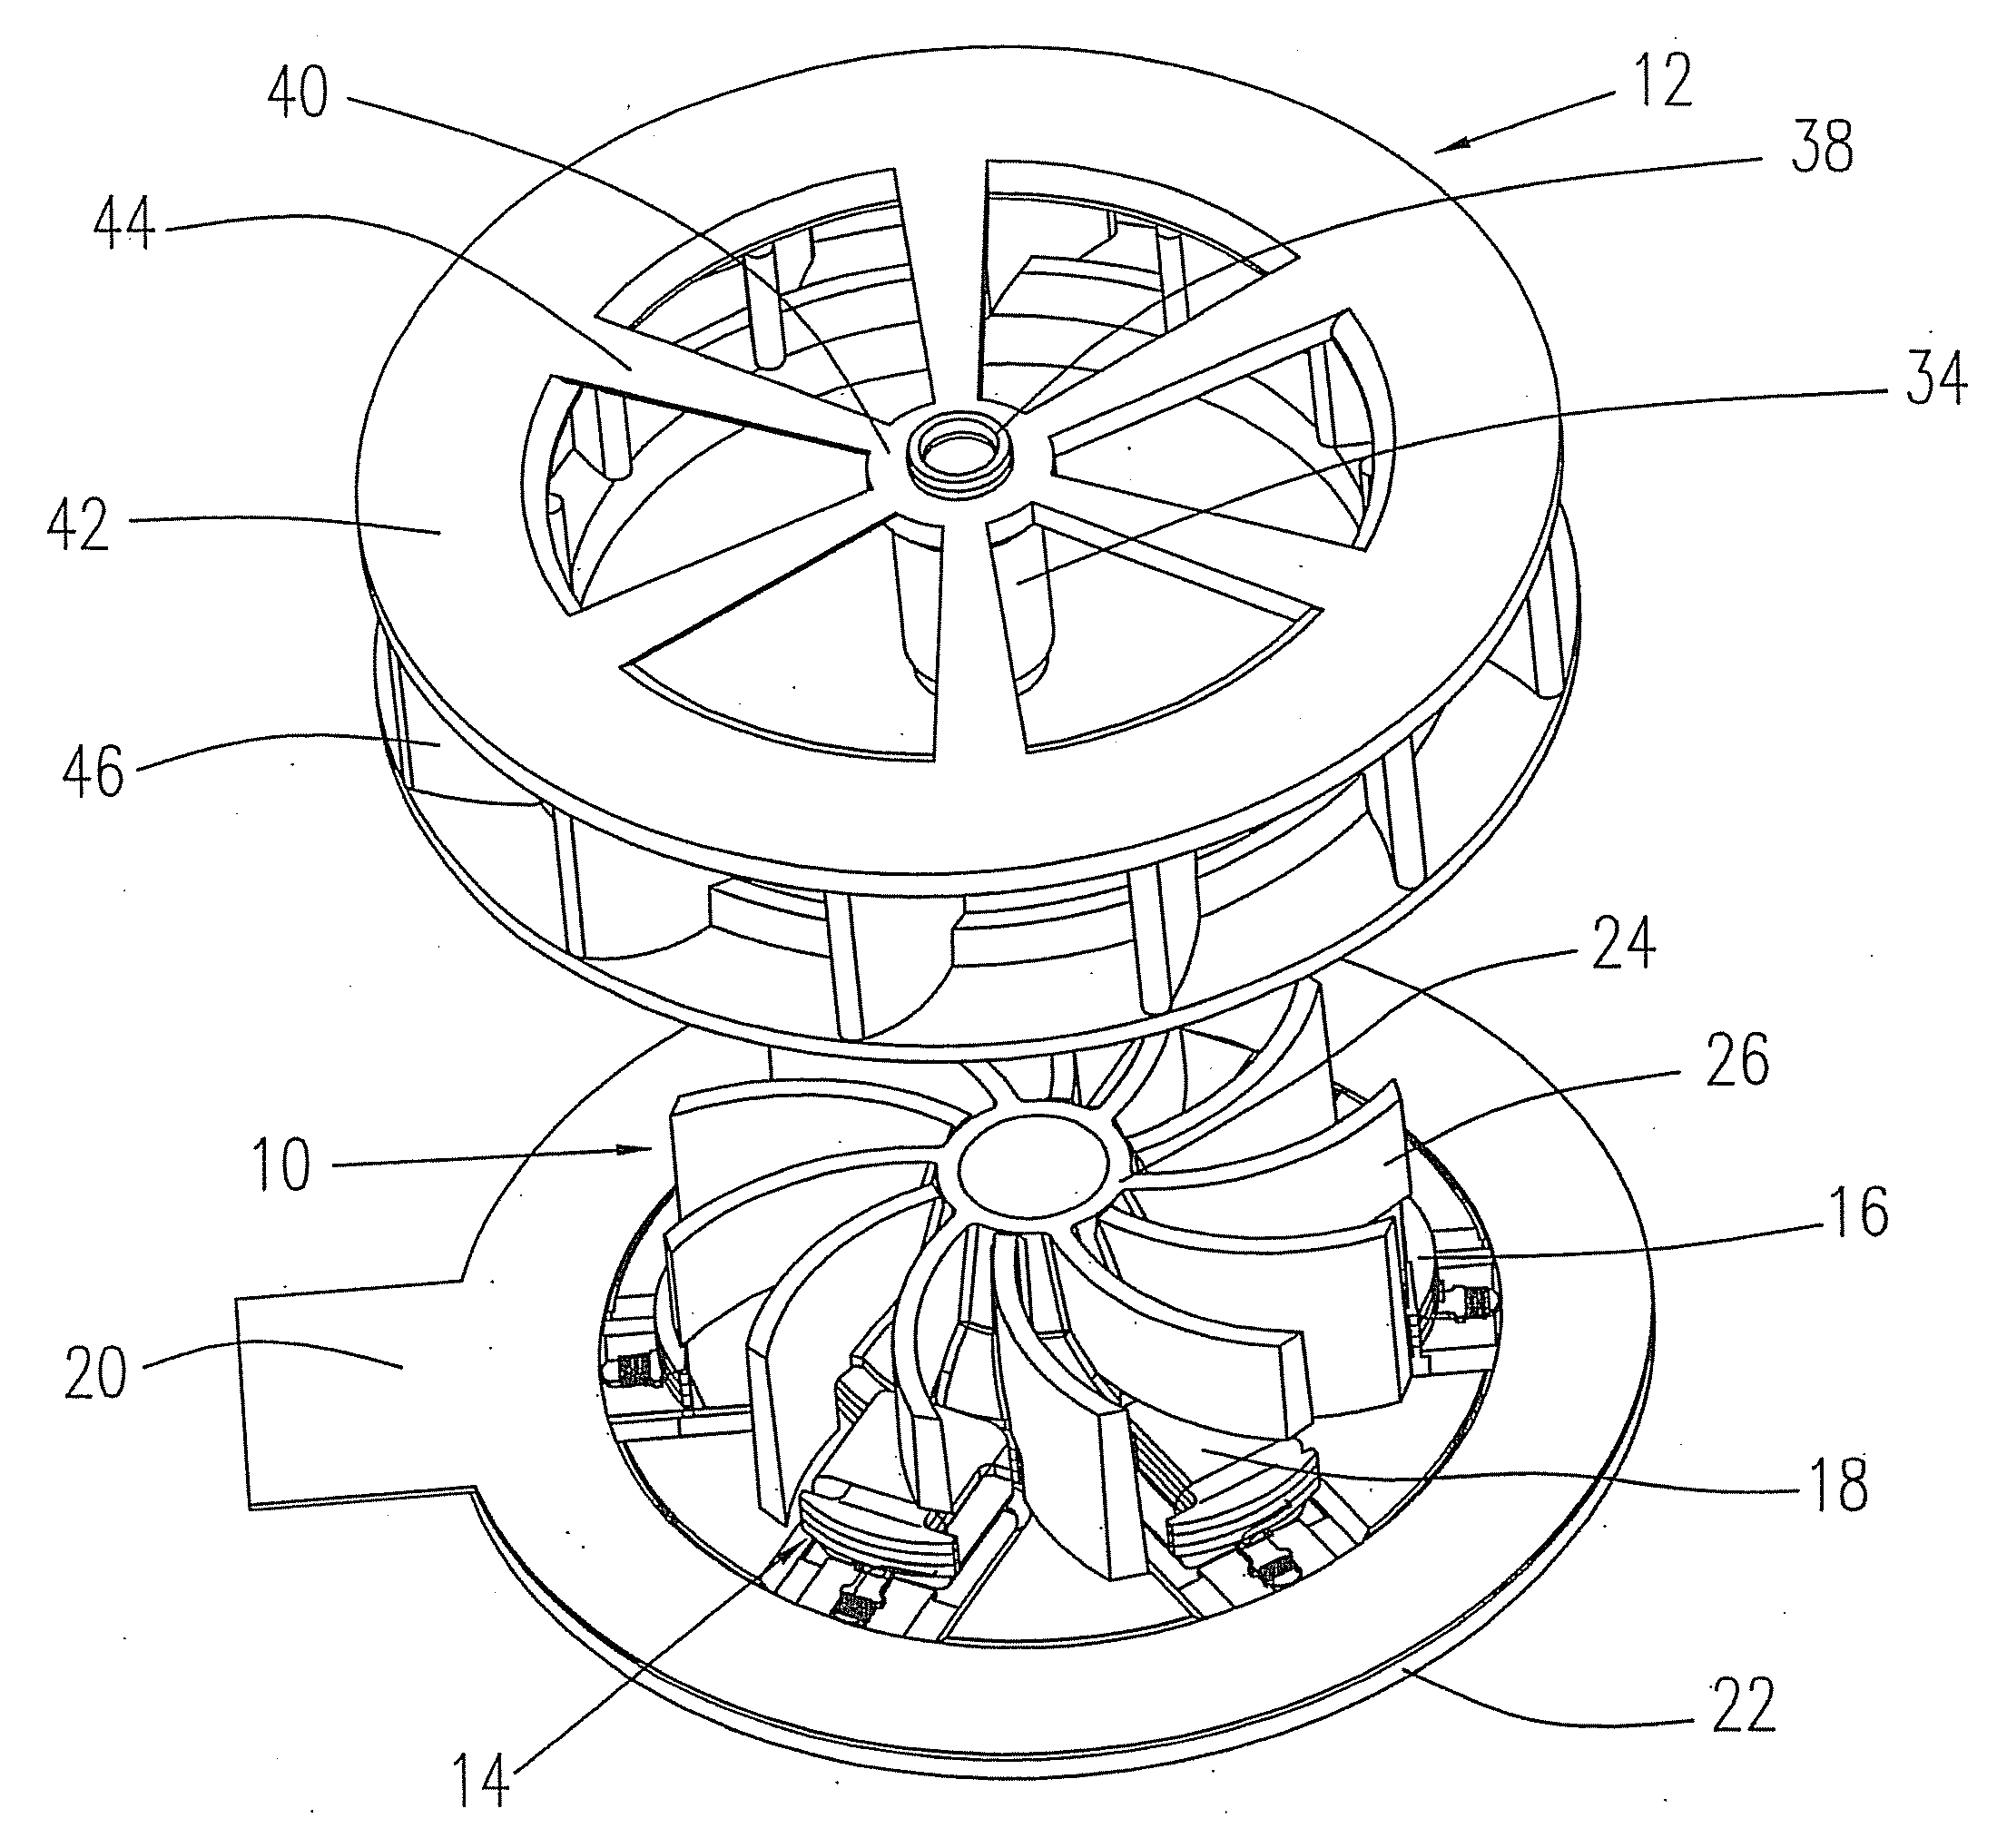 Cooling apparatus for an electronic device to be cooled